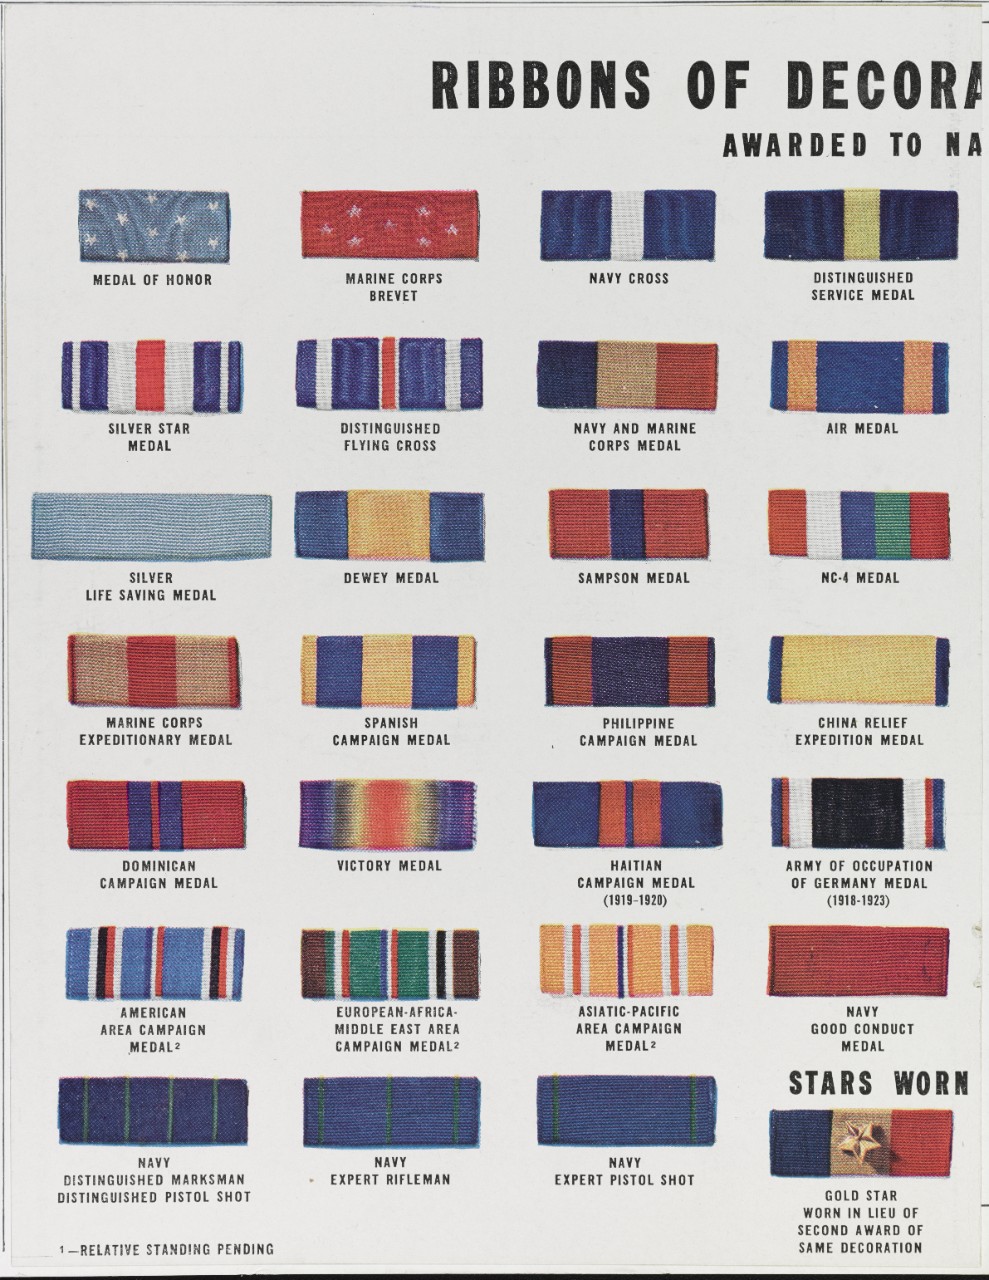 Ribbons of Decorations and medals for Naval personnel, as of 1942.